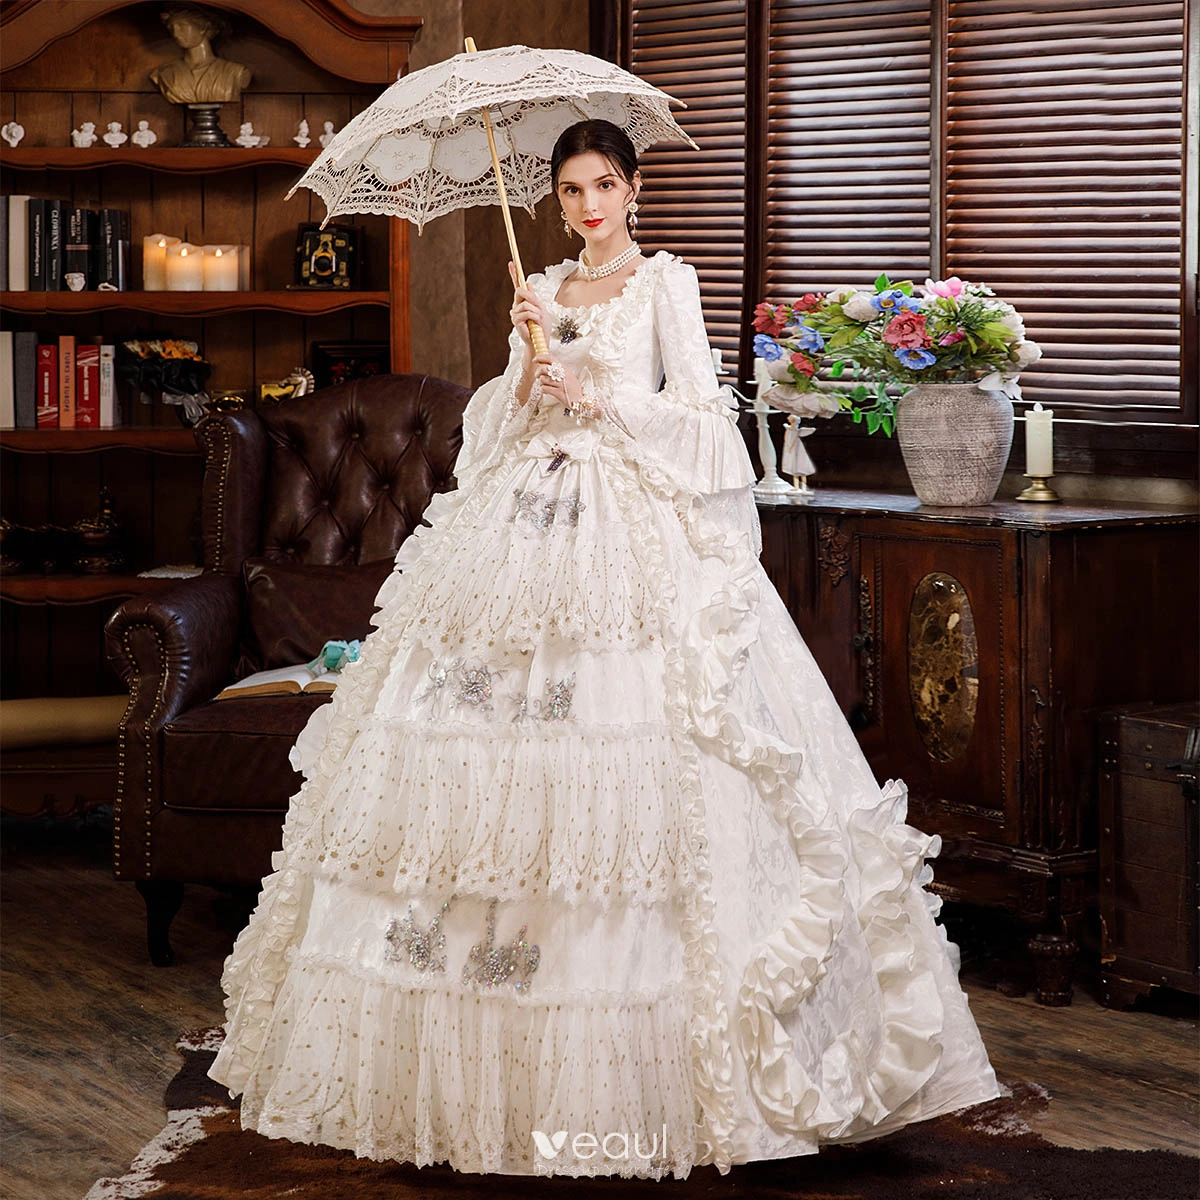 High Neck Ball Gown Wedding Dress with Sleeves 66991 – Viniodress